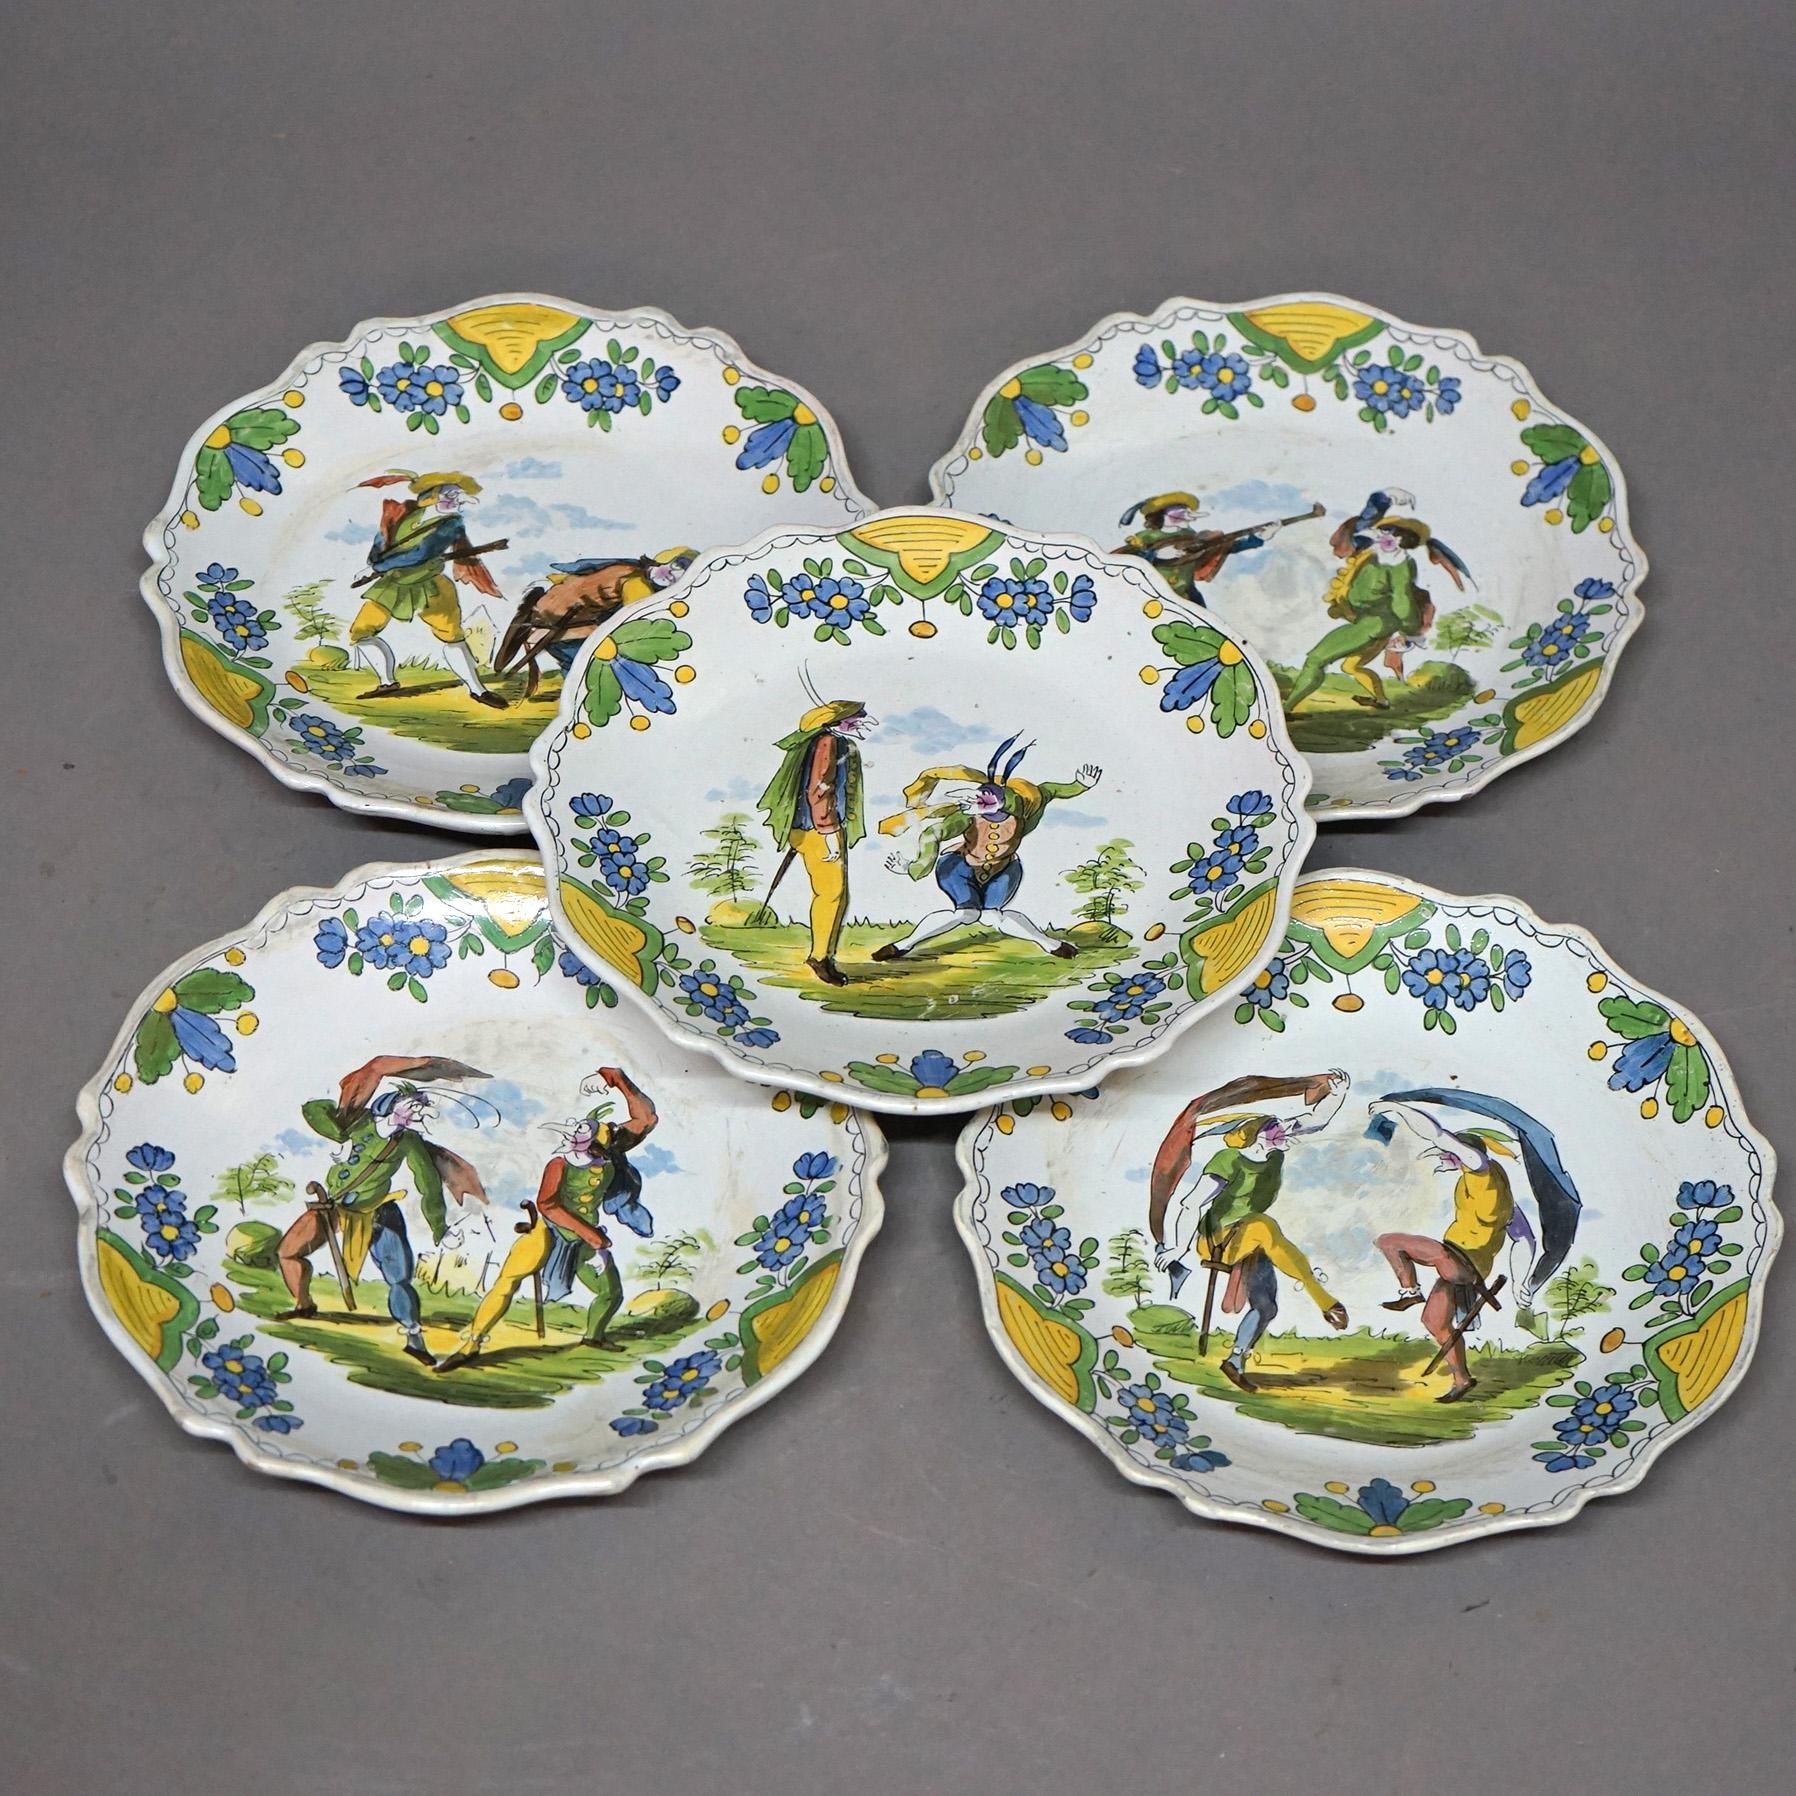 A set of five antique French character plates by Les Islettes offer hand painted Faience soft paste pottery construction with figures, late 18th century

Measures- 1''H x 9.75''W x 9.75''D